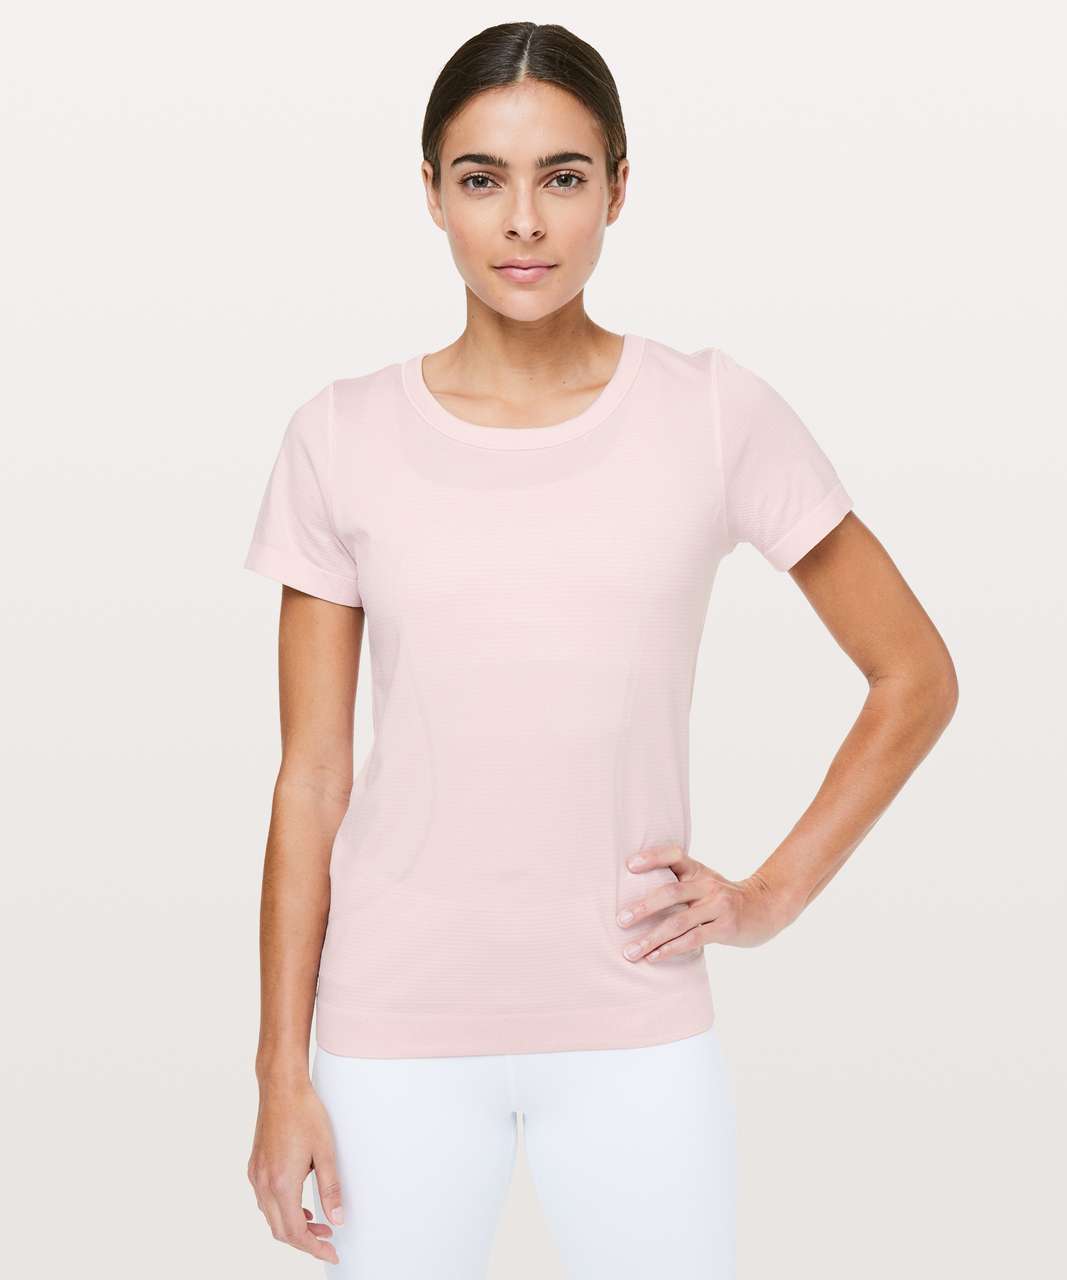 Lululemon Swiftly Tech Short Sleeve (Breeze) *Relaxed Fit - Blissful Pink / Blissful Pink